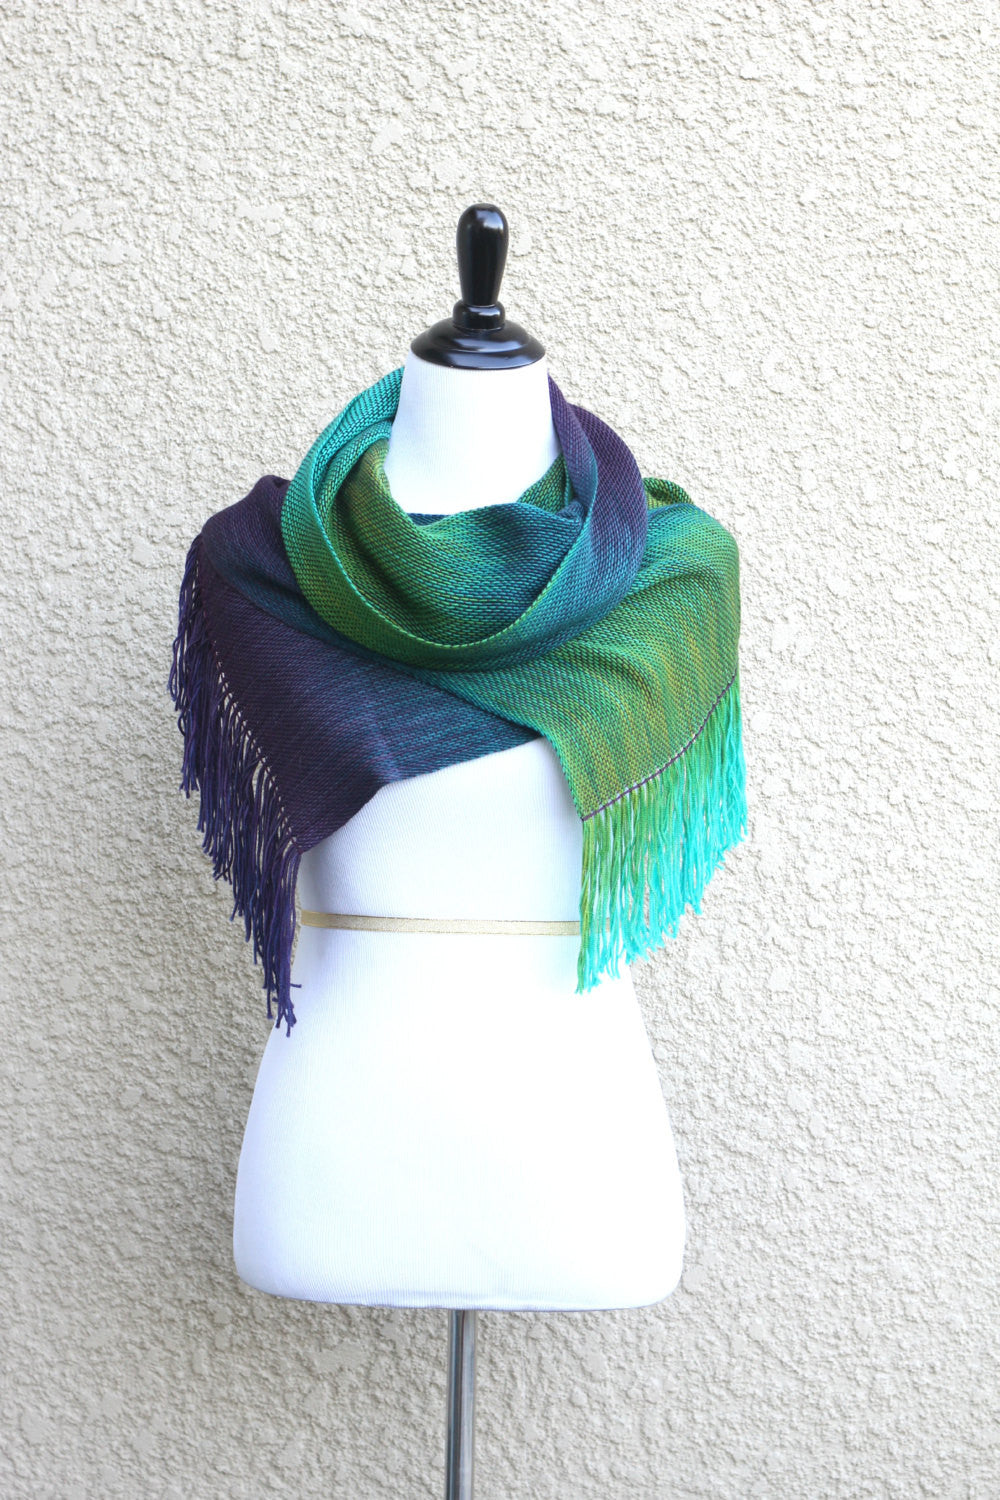 Peacock colorway woven scarf